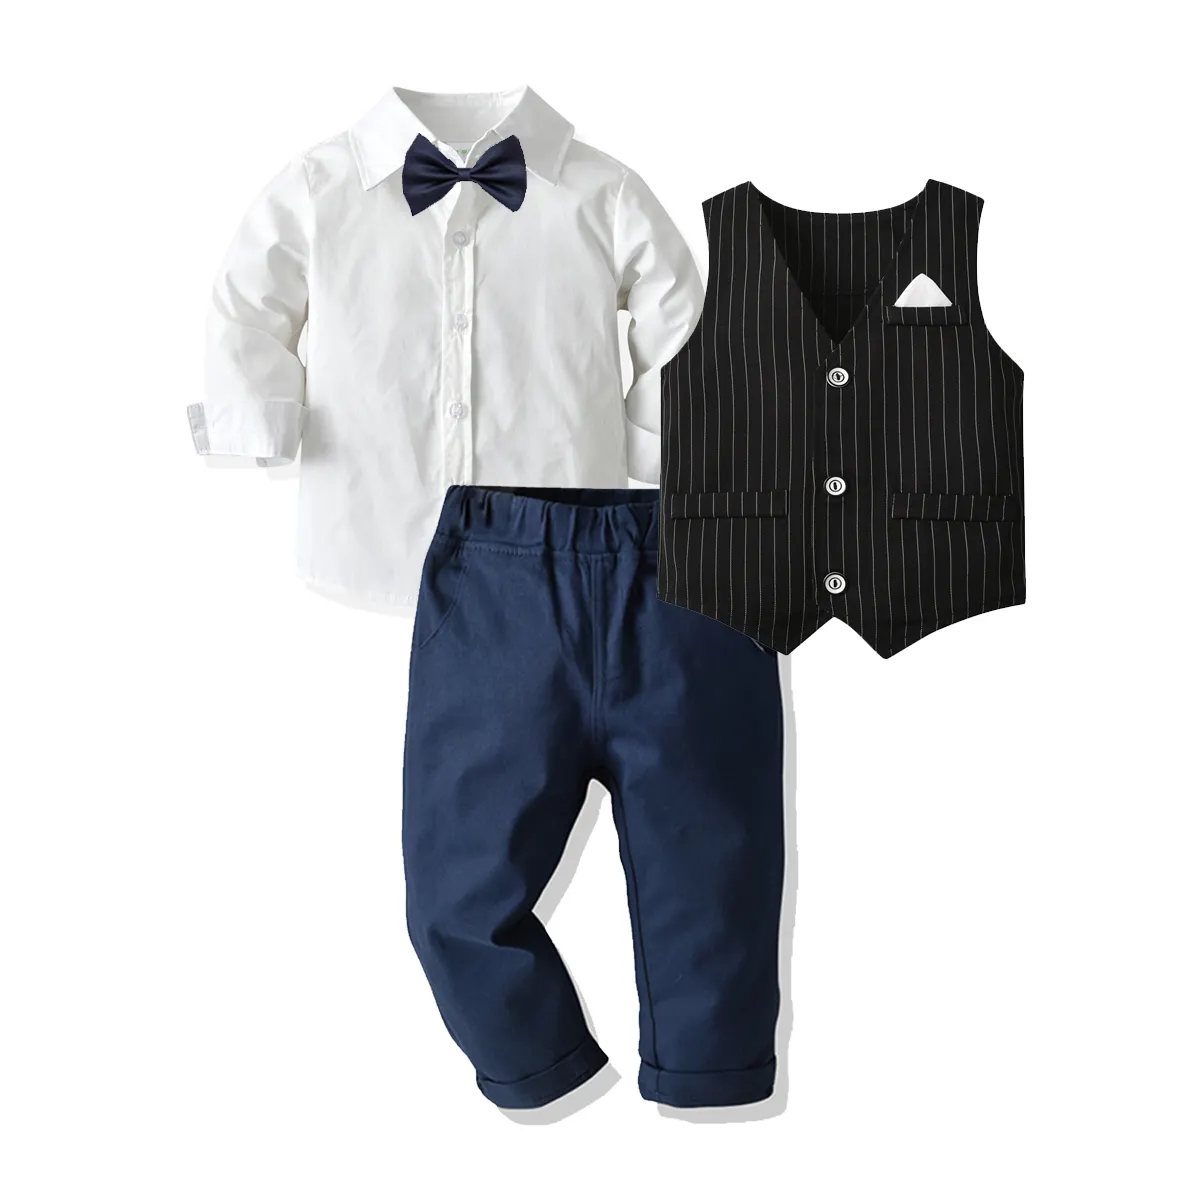 hot sale summer kids cotton wear birthday party suits gentleman's suit for boys 22v094